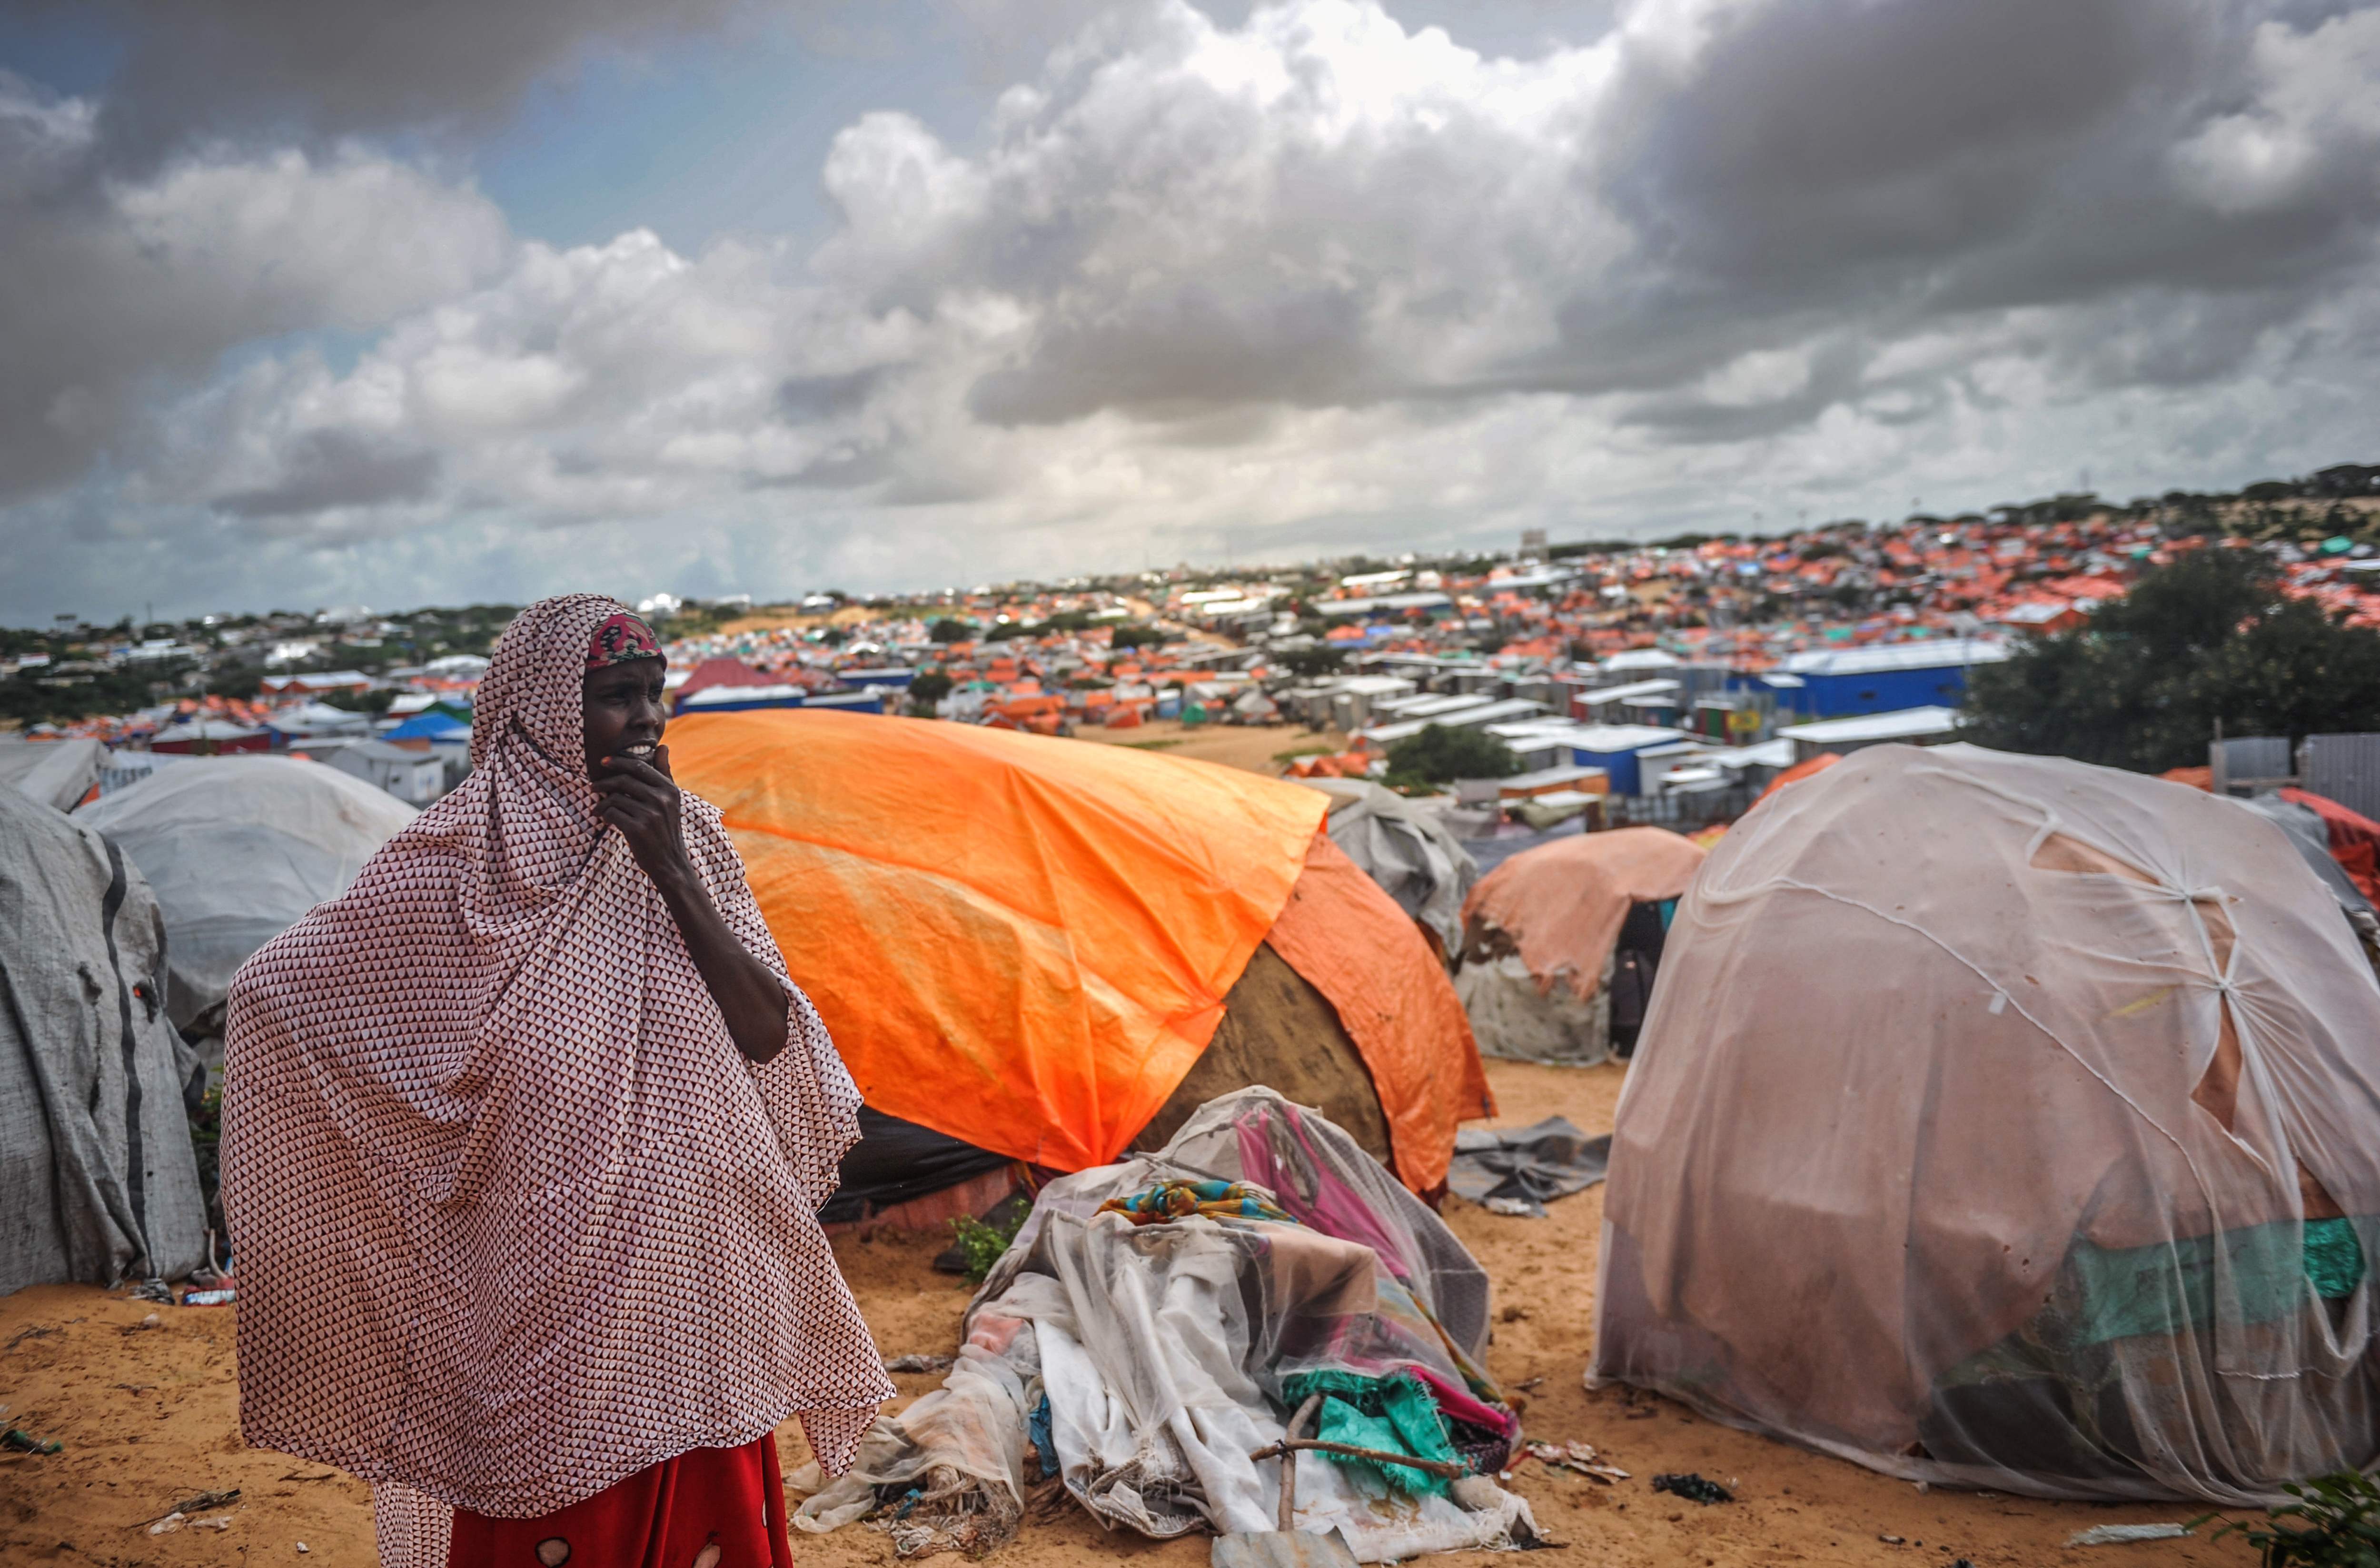 A Somali woman stands next to her makeshift tent at Tawakal IDP camp in Mogadishu, Somalia, on June 19, 2018.